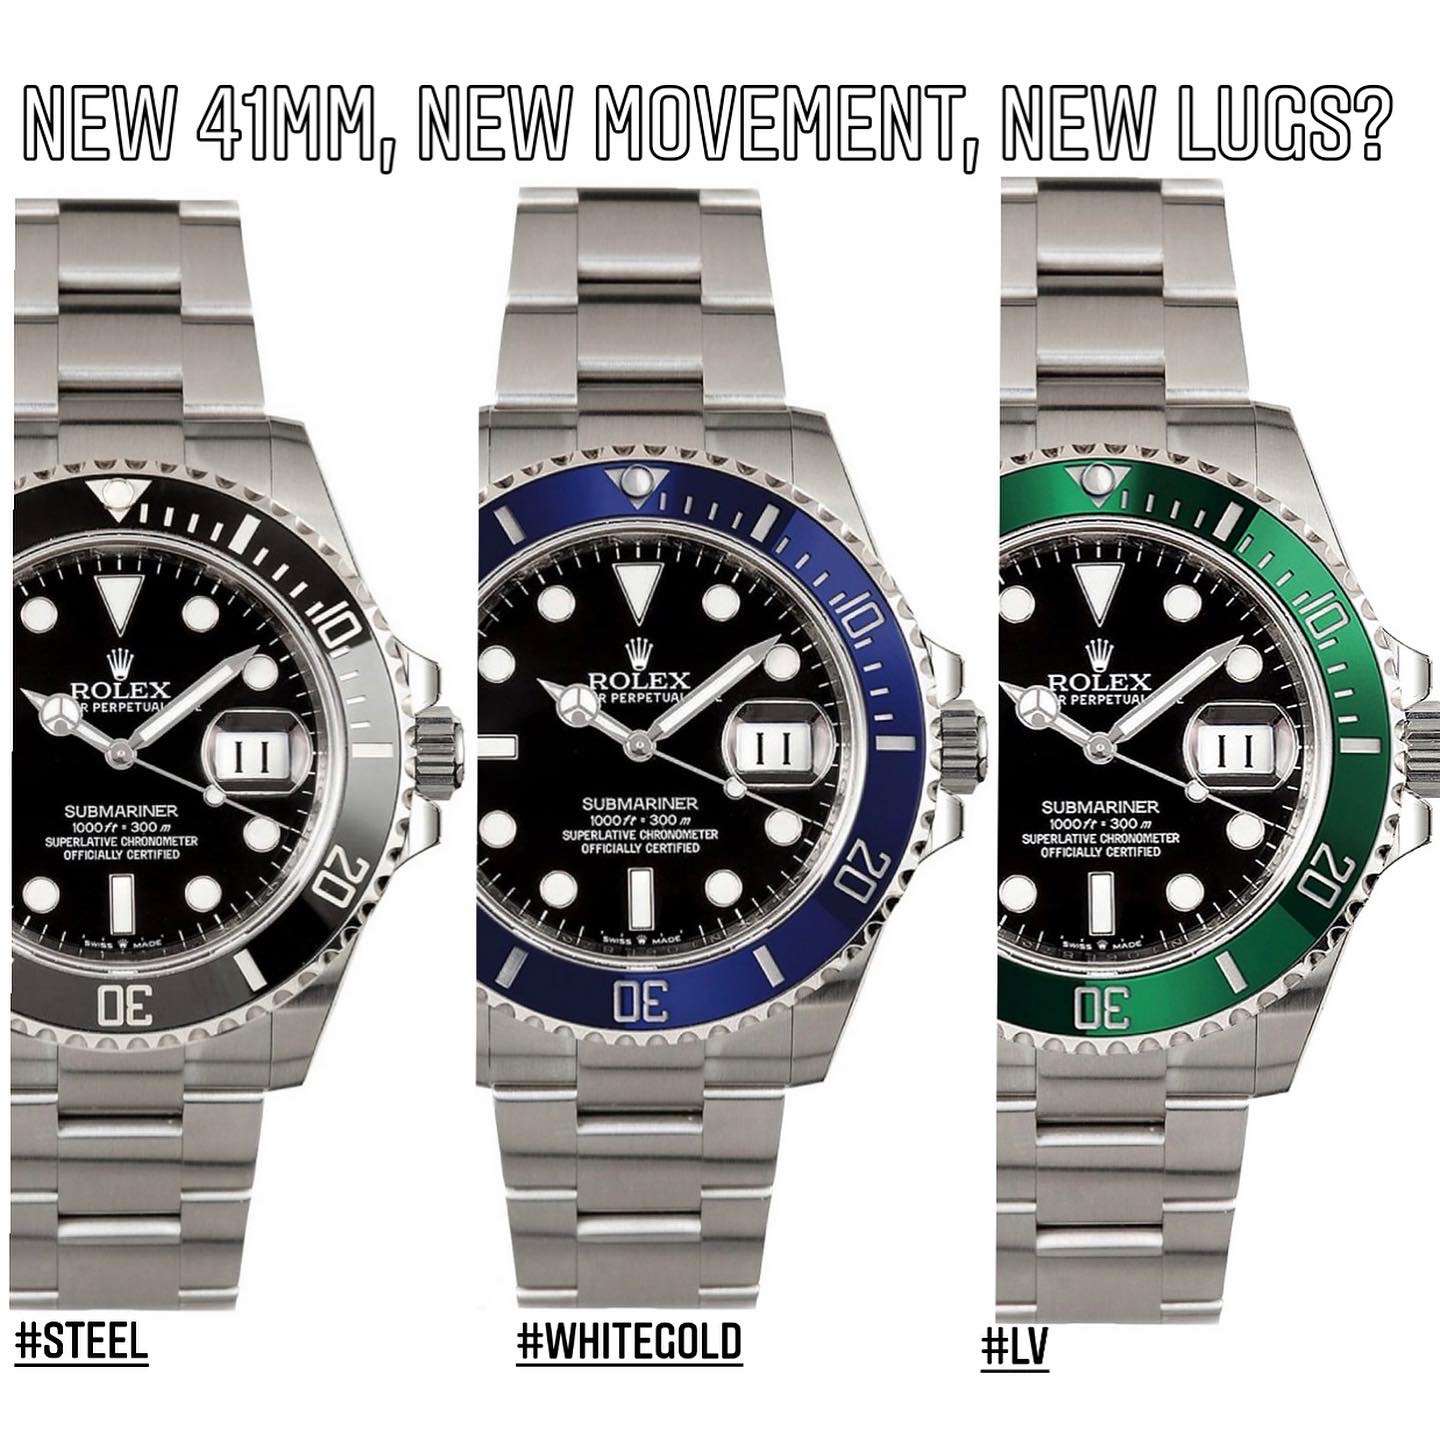 Rolex 2020 - is out! on :) - Rolex Passion Report